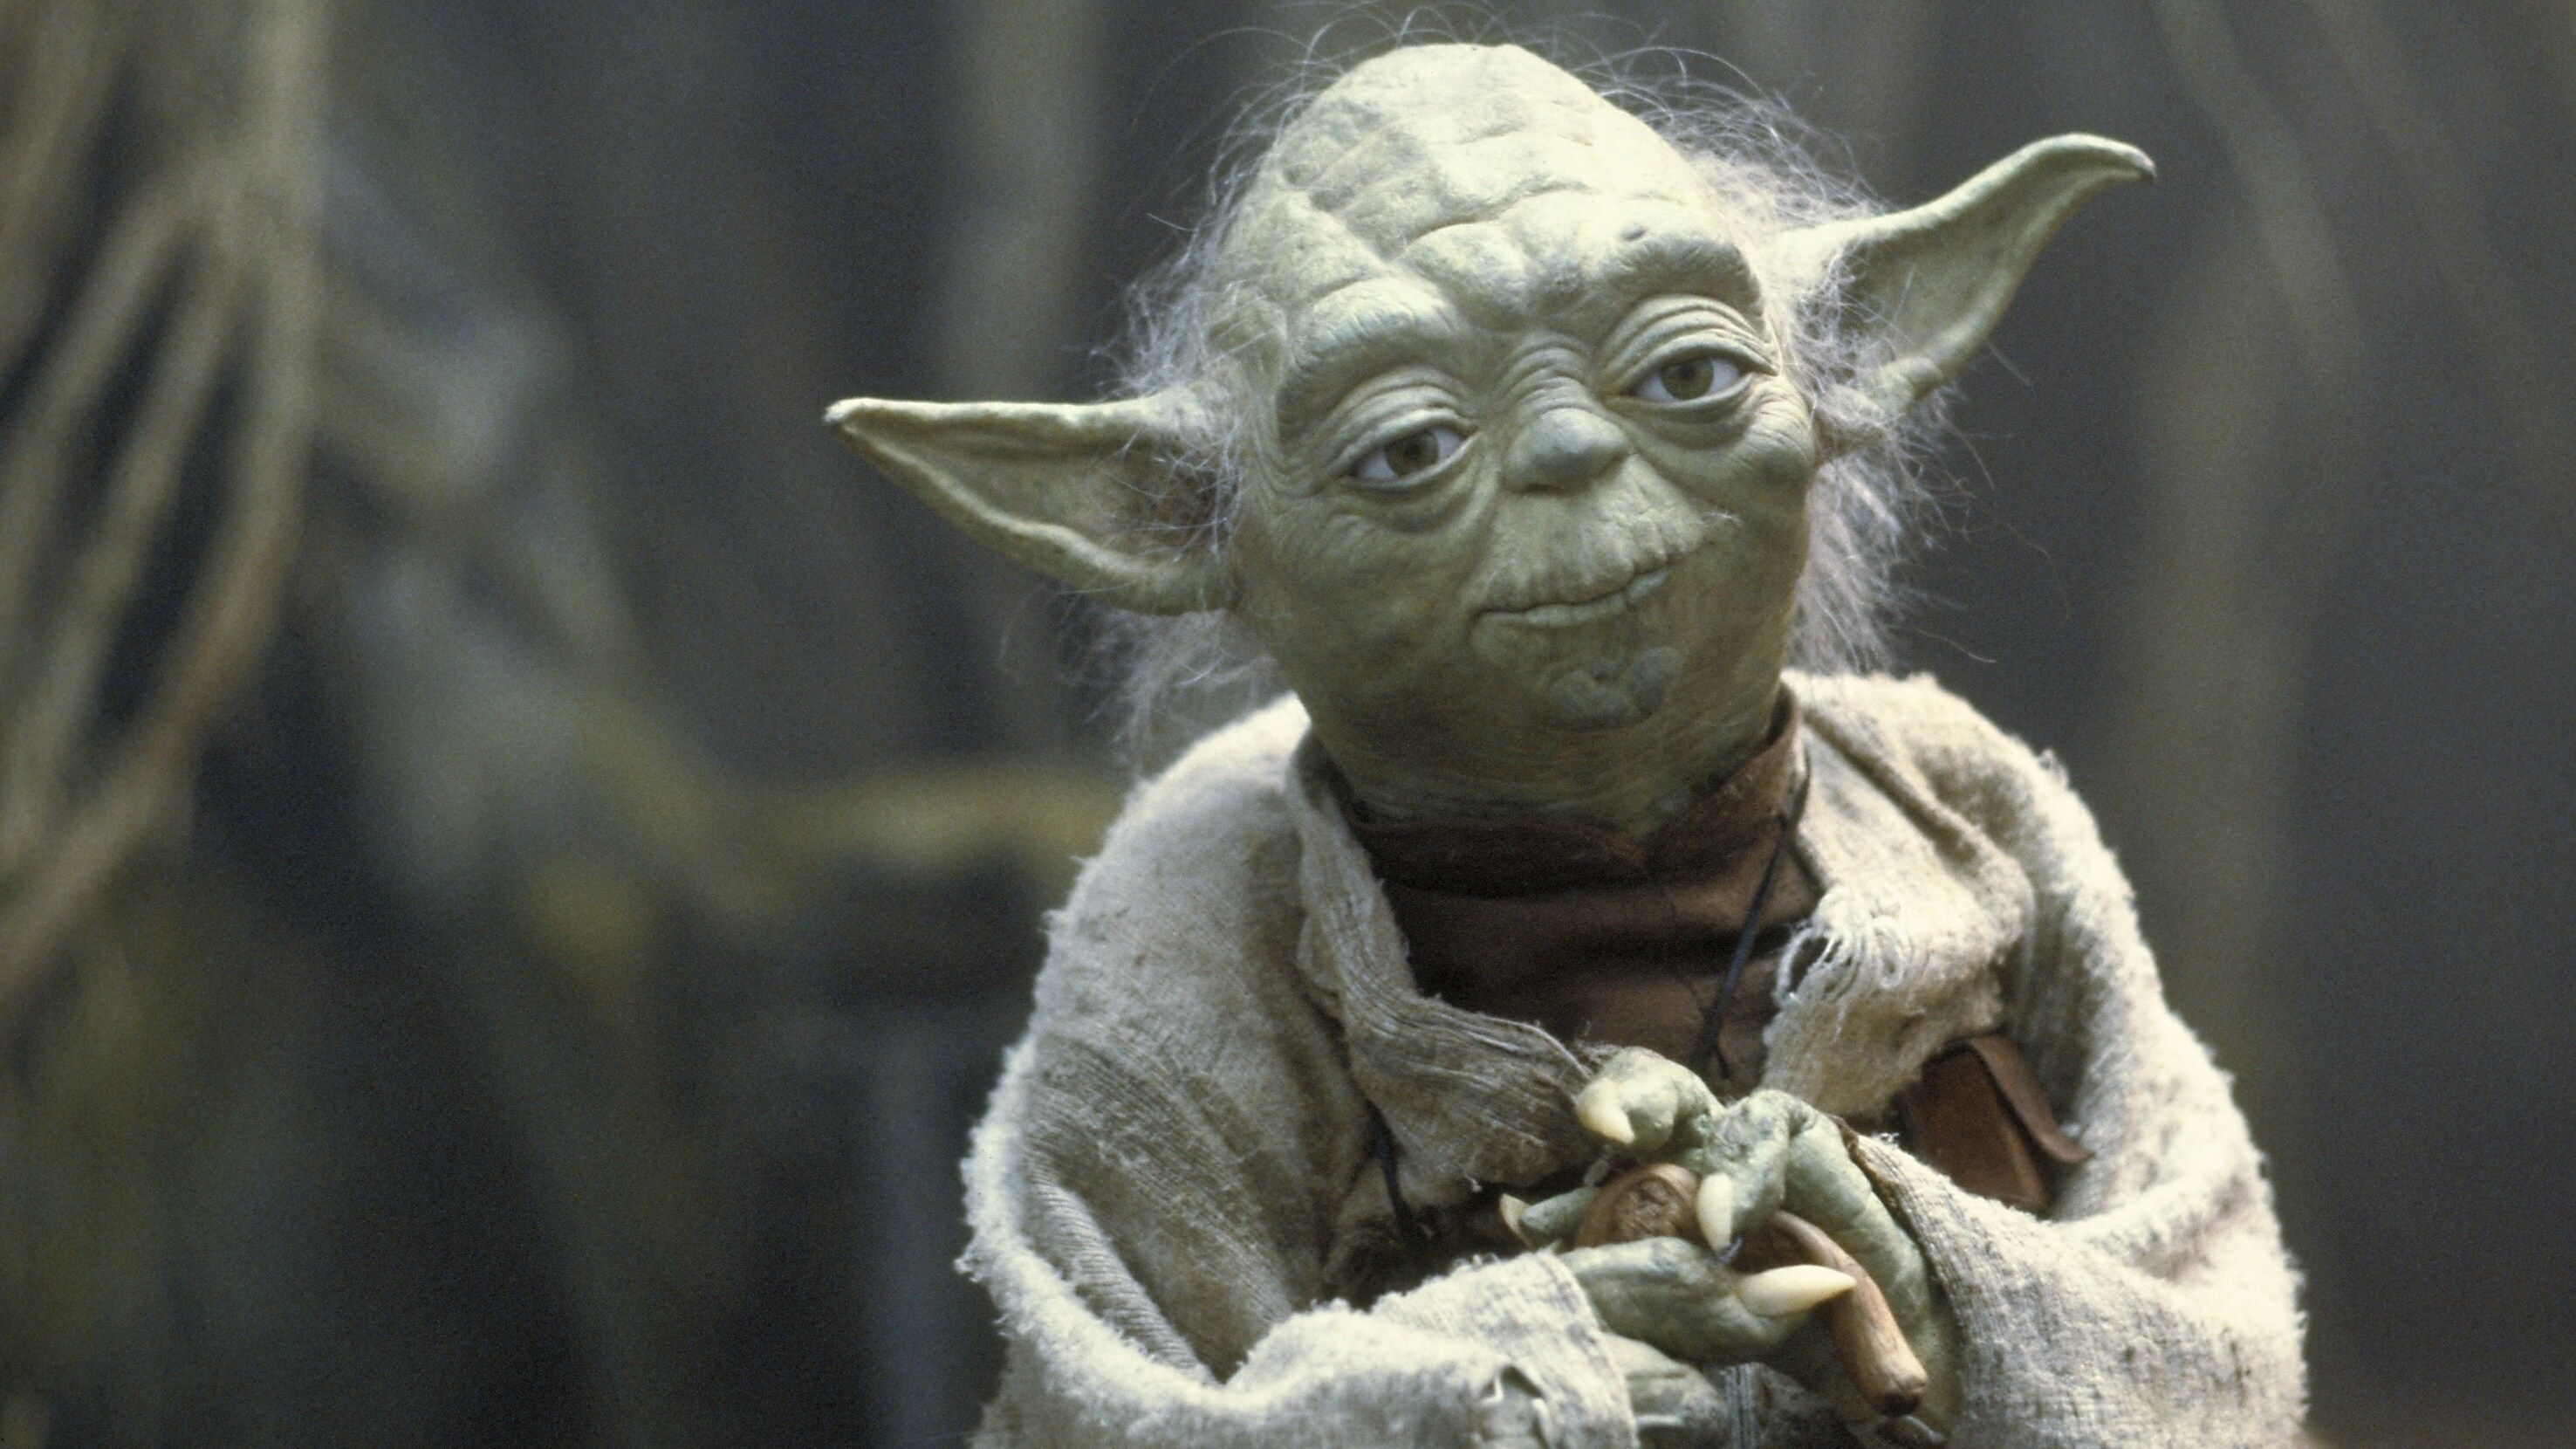 Poll: What Was Yoda's Greatest Moment?